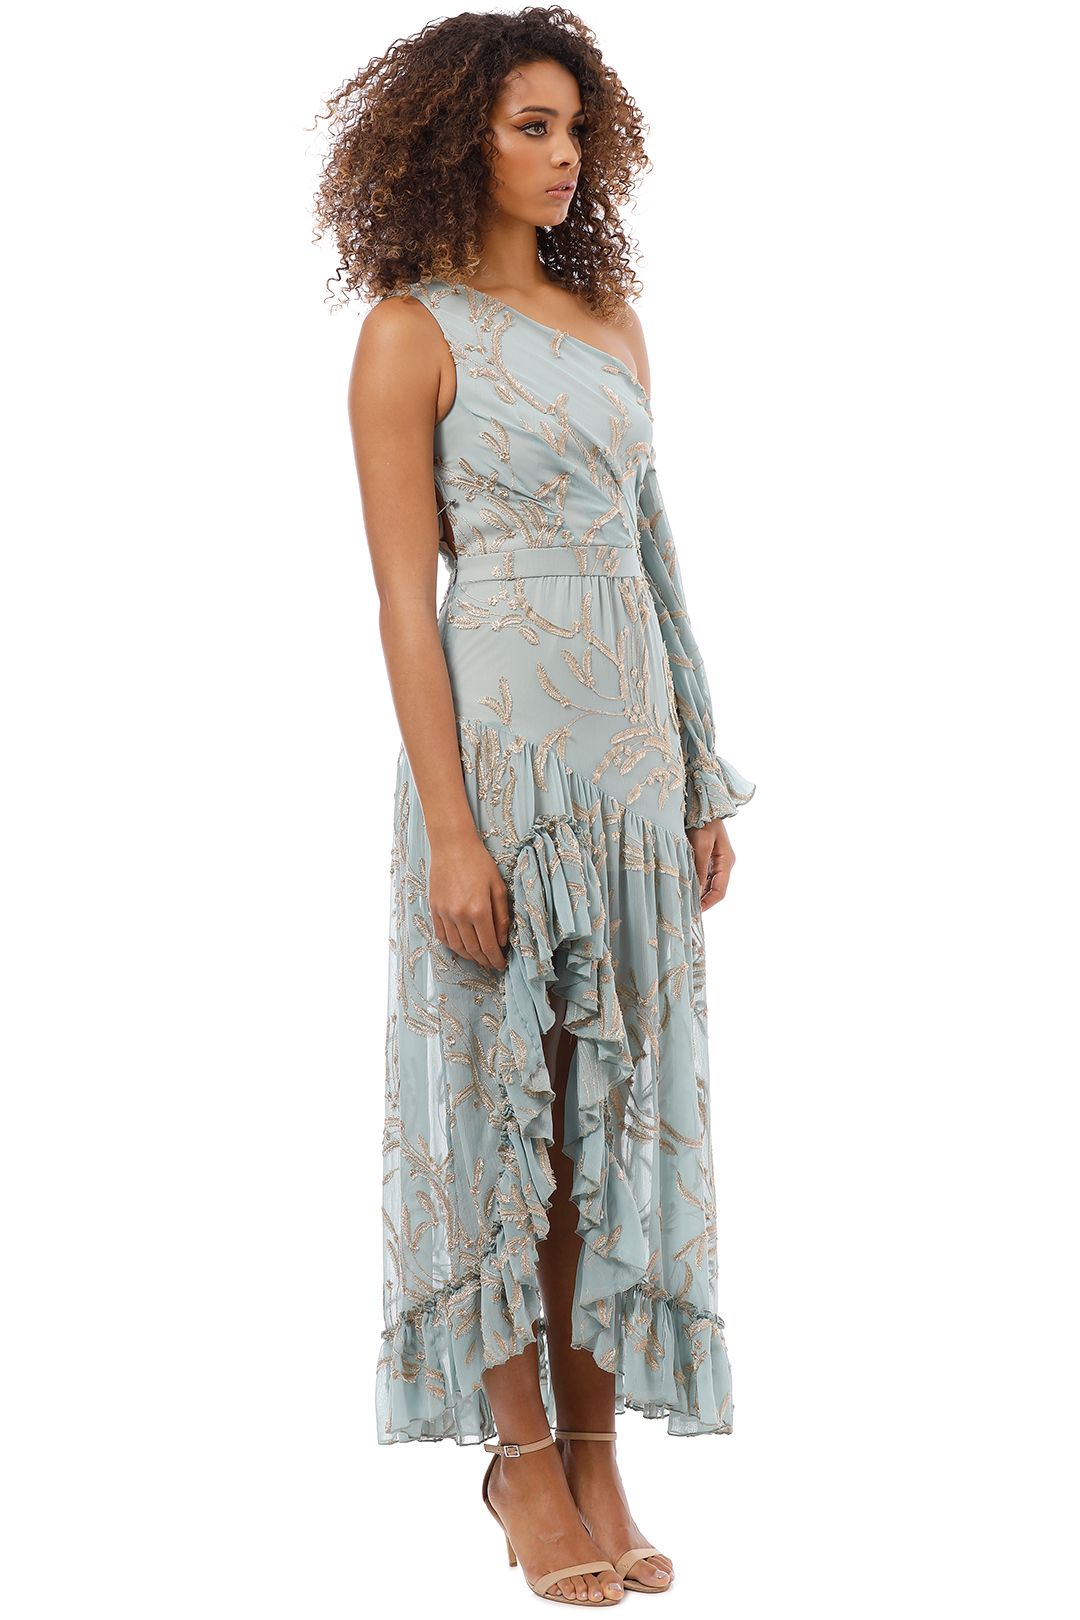 We Are Kindred - Maxime One Shoulder Maxi Dress - Blue - Side